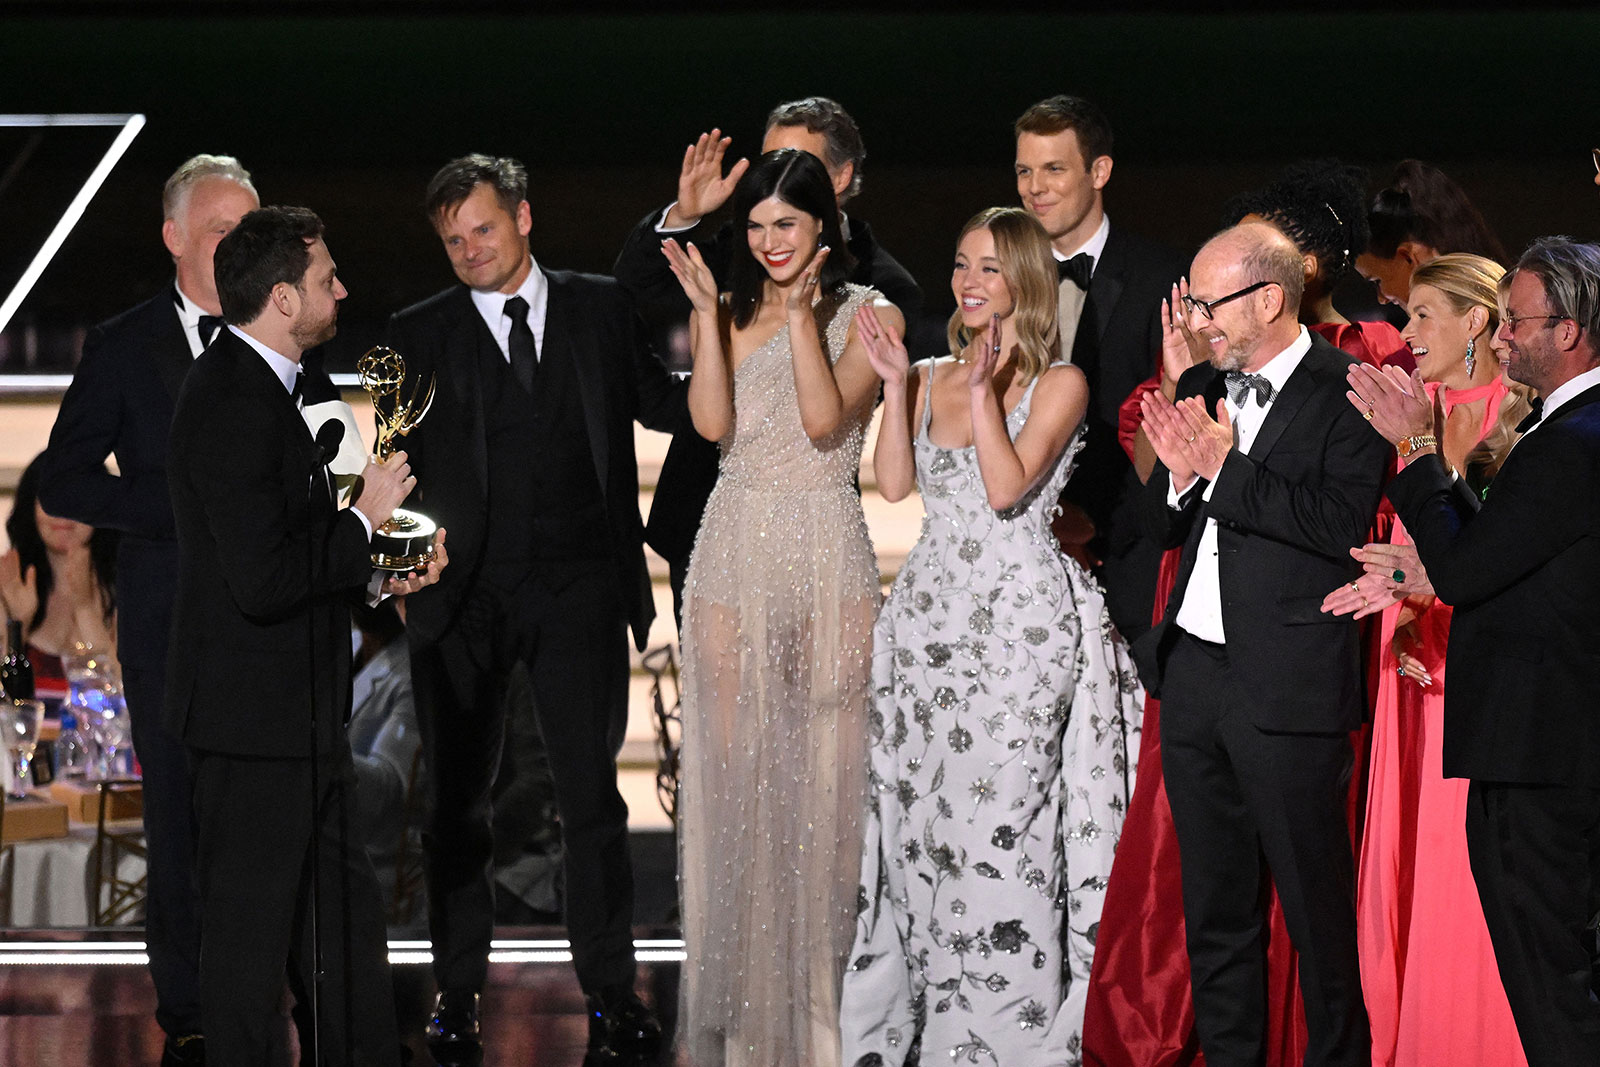 David Bernad, left, accepts the Emmy for outstanding limited or anthology series alongside cast and crew members of "White Lotus."